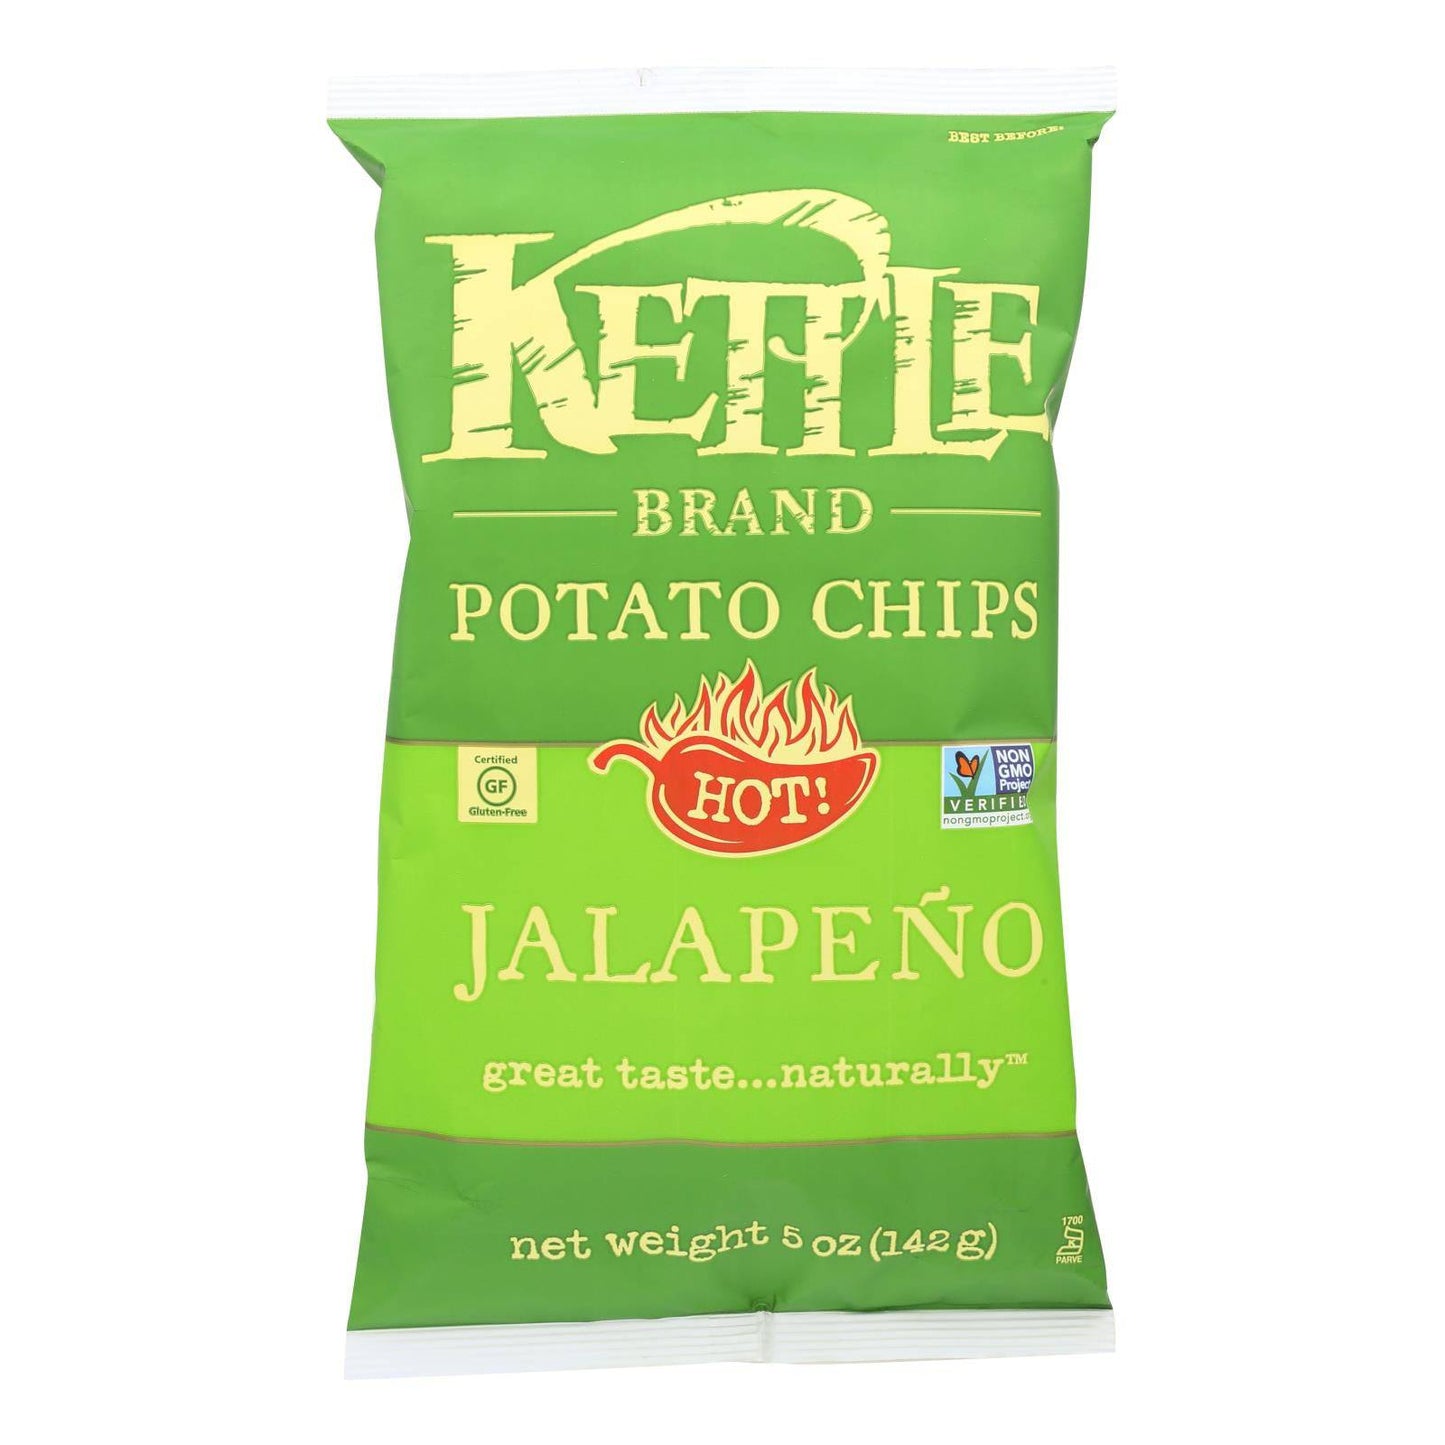 Buy Kettle Brand Potato Chips - Jalapeno - Case Of 15 - 5 Oz.  at OnlyNaturals.us